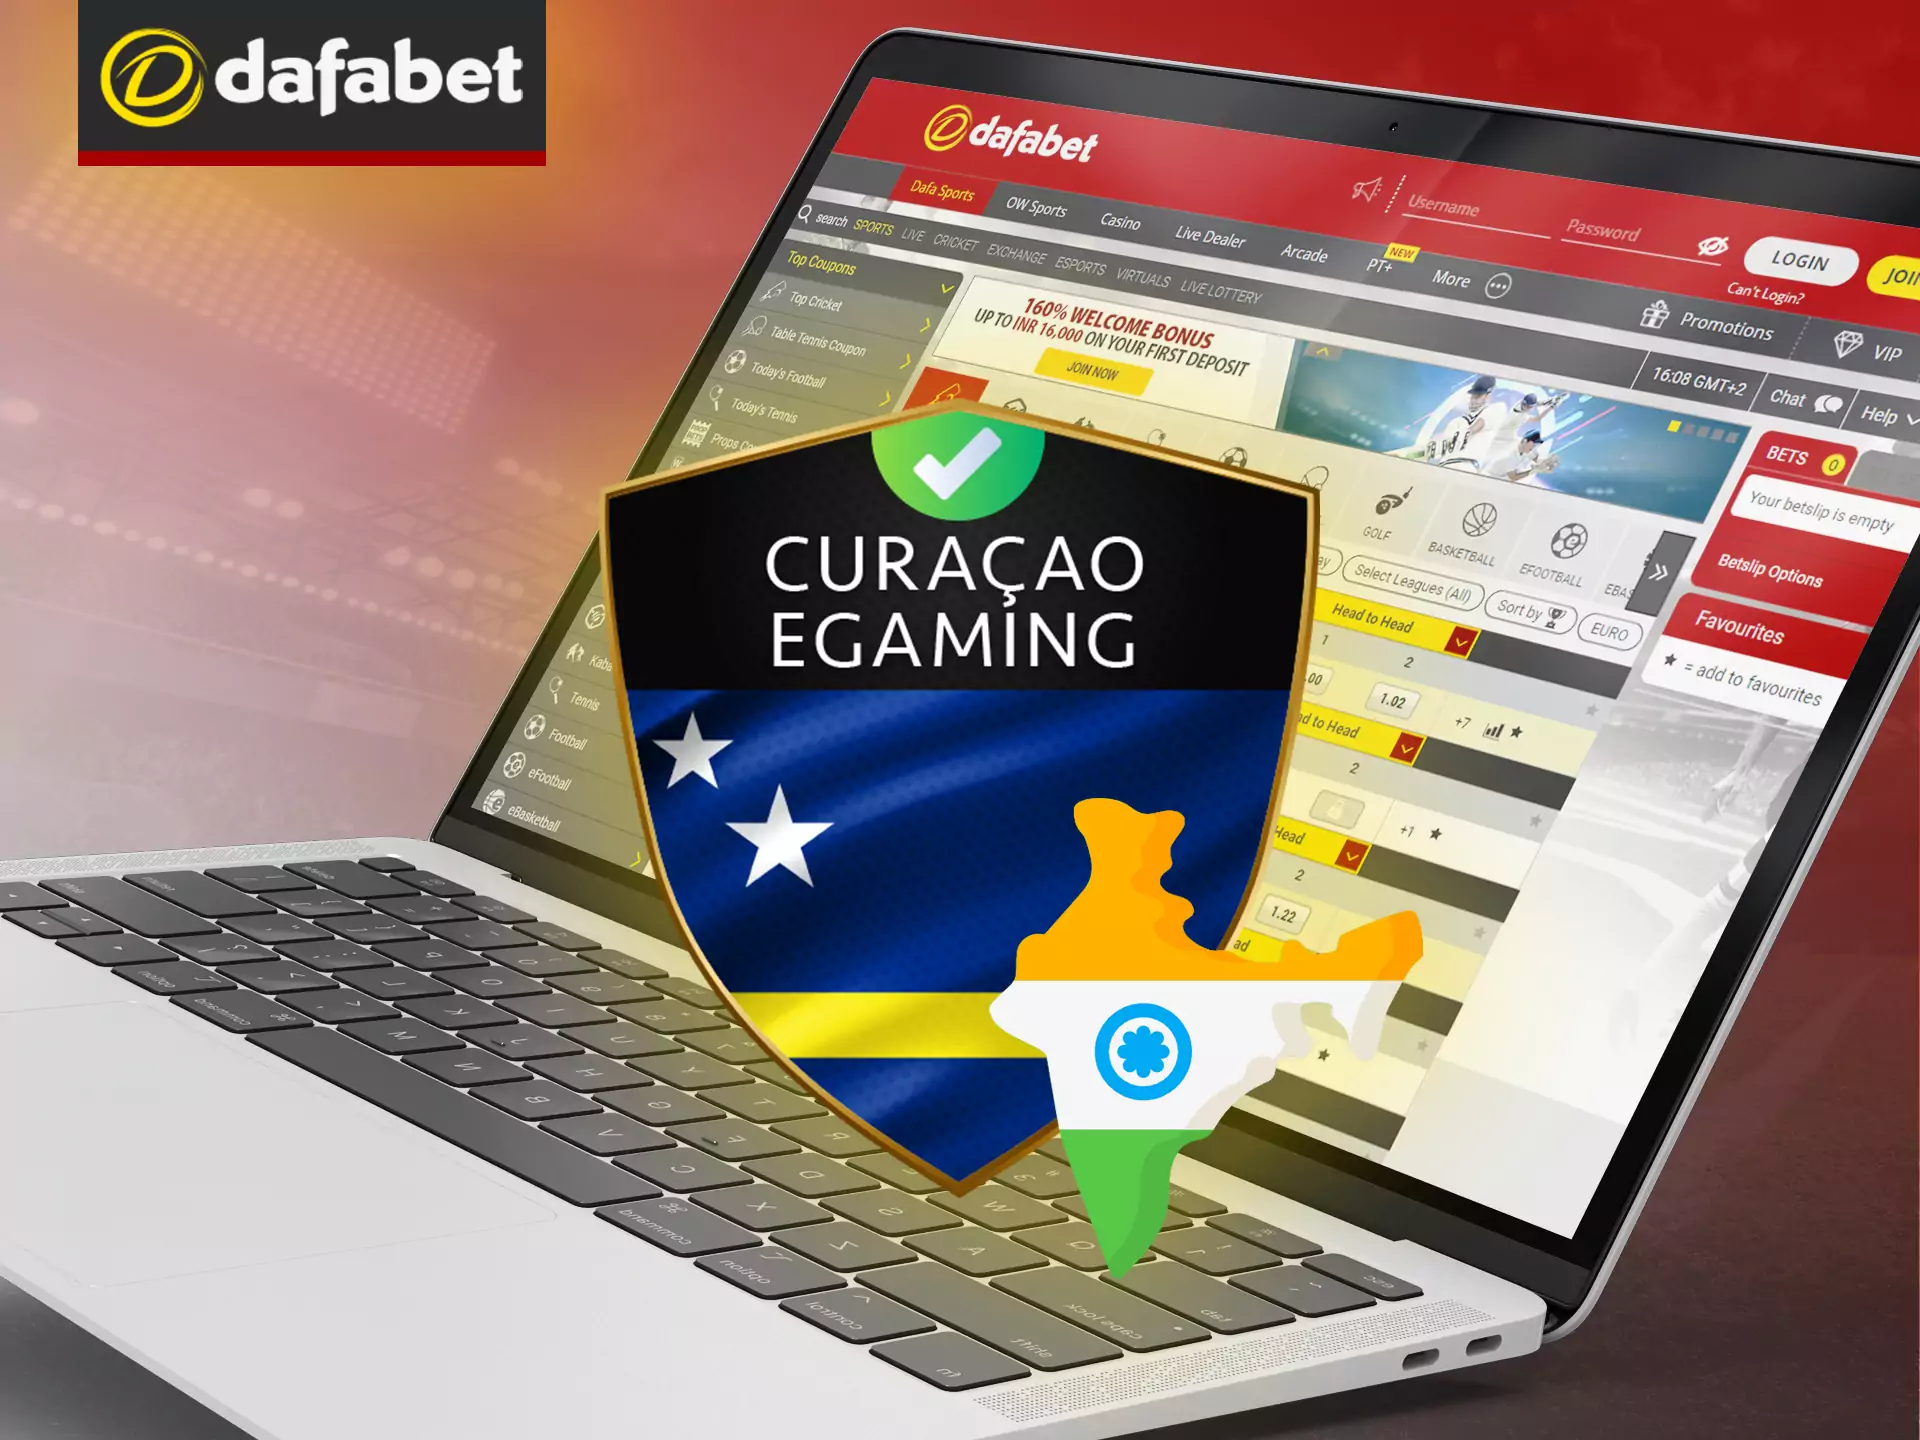 Dafabet service is officially licensed and safe for players.